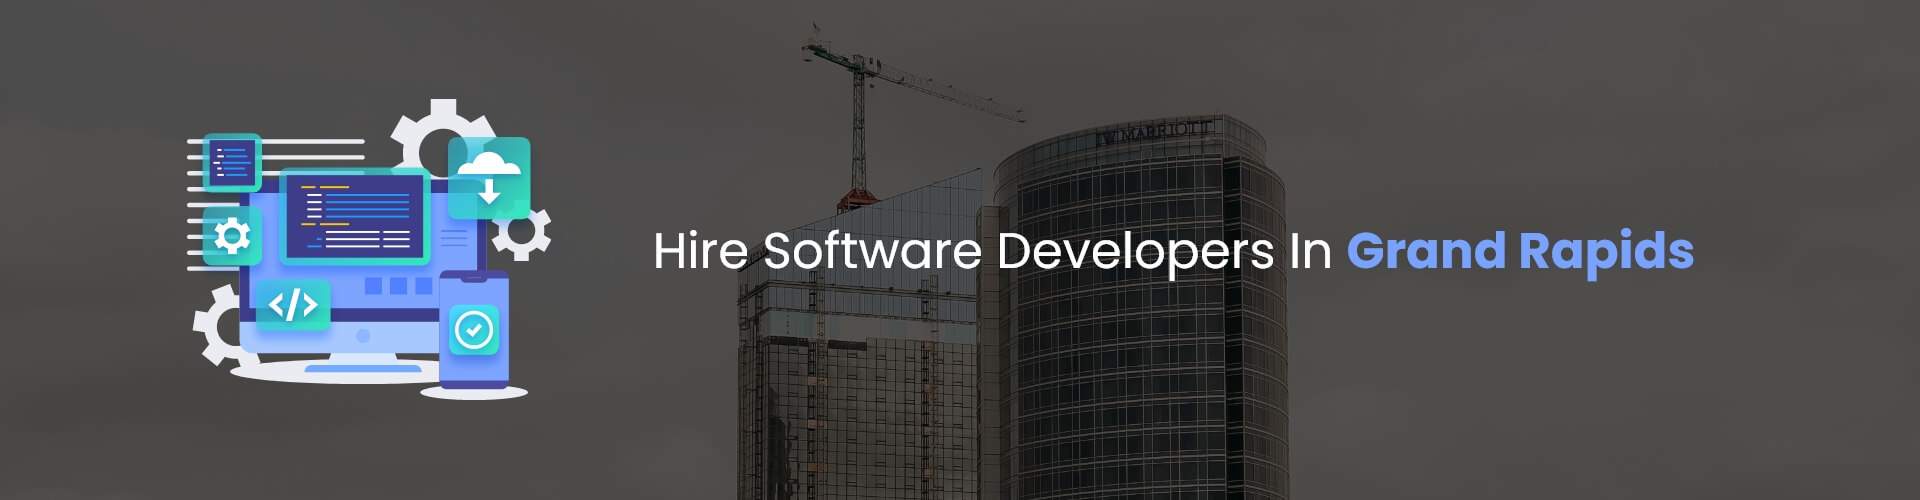 hire software developers in grand rapids